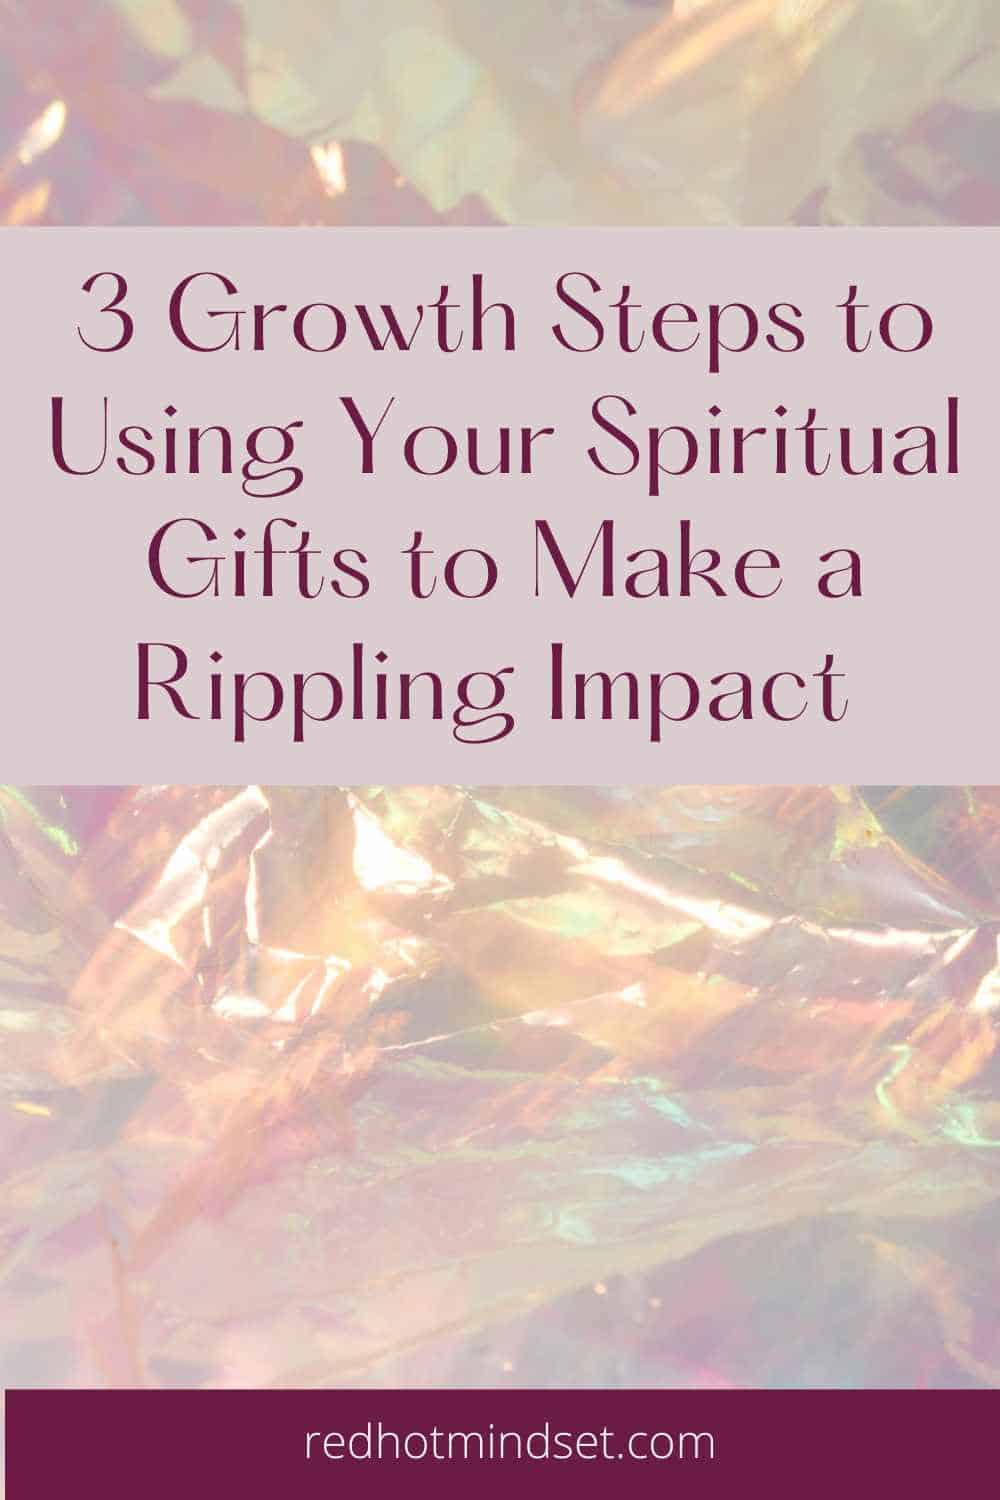 Ep 182 | 3 Growth Steps to Using Your Spiritual Gifts to Make a Rippling Impact